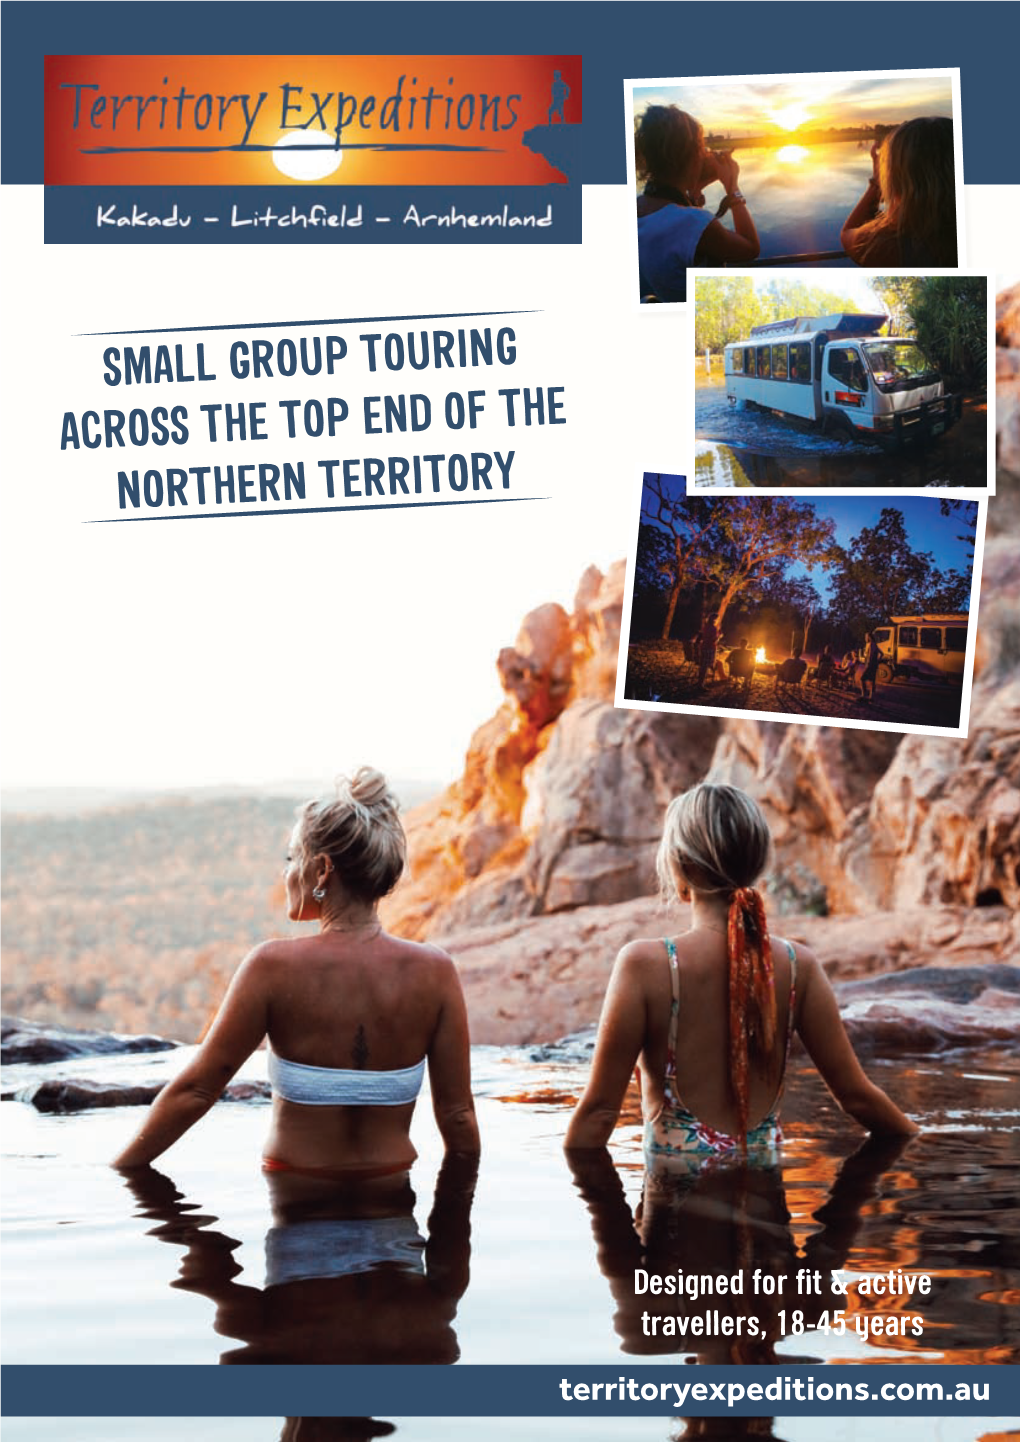 Small Group Touring Across the Top End of the Northern Territory